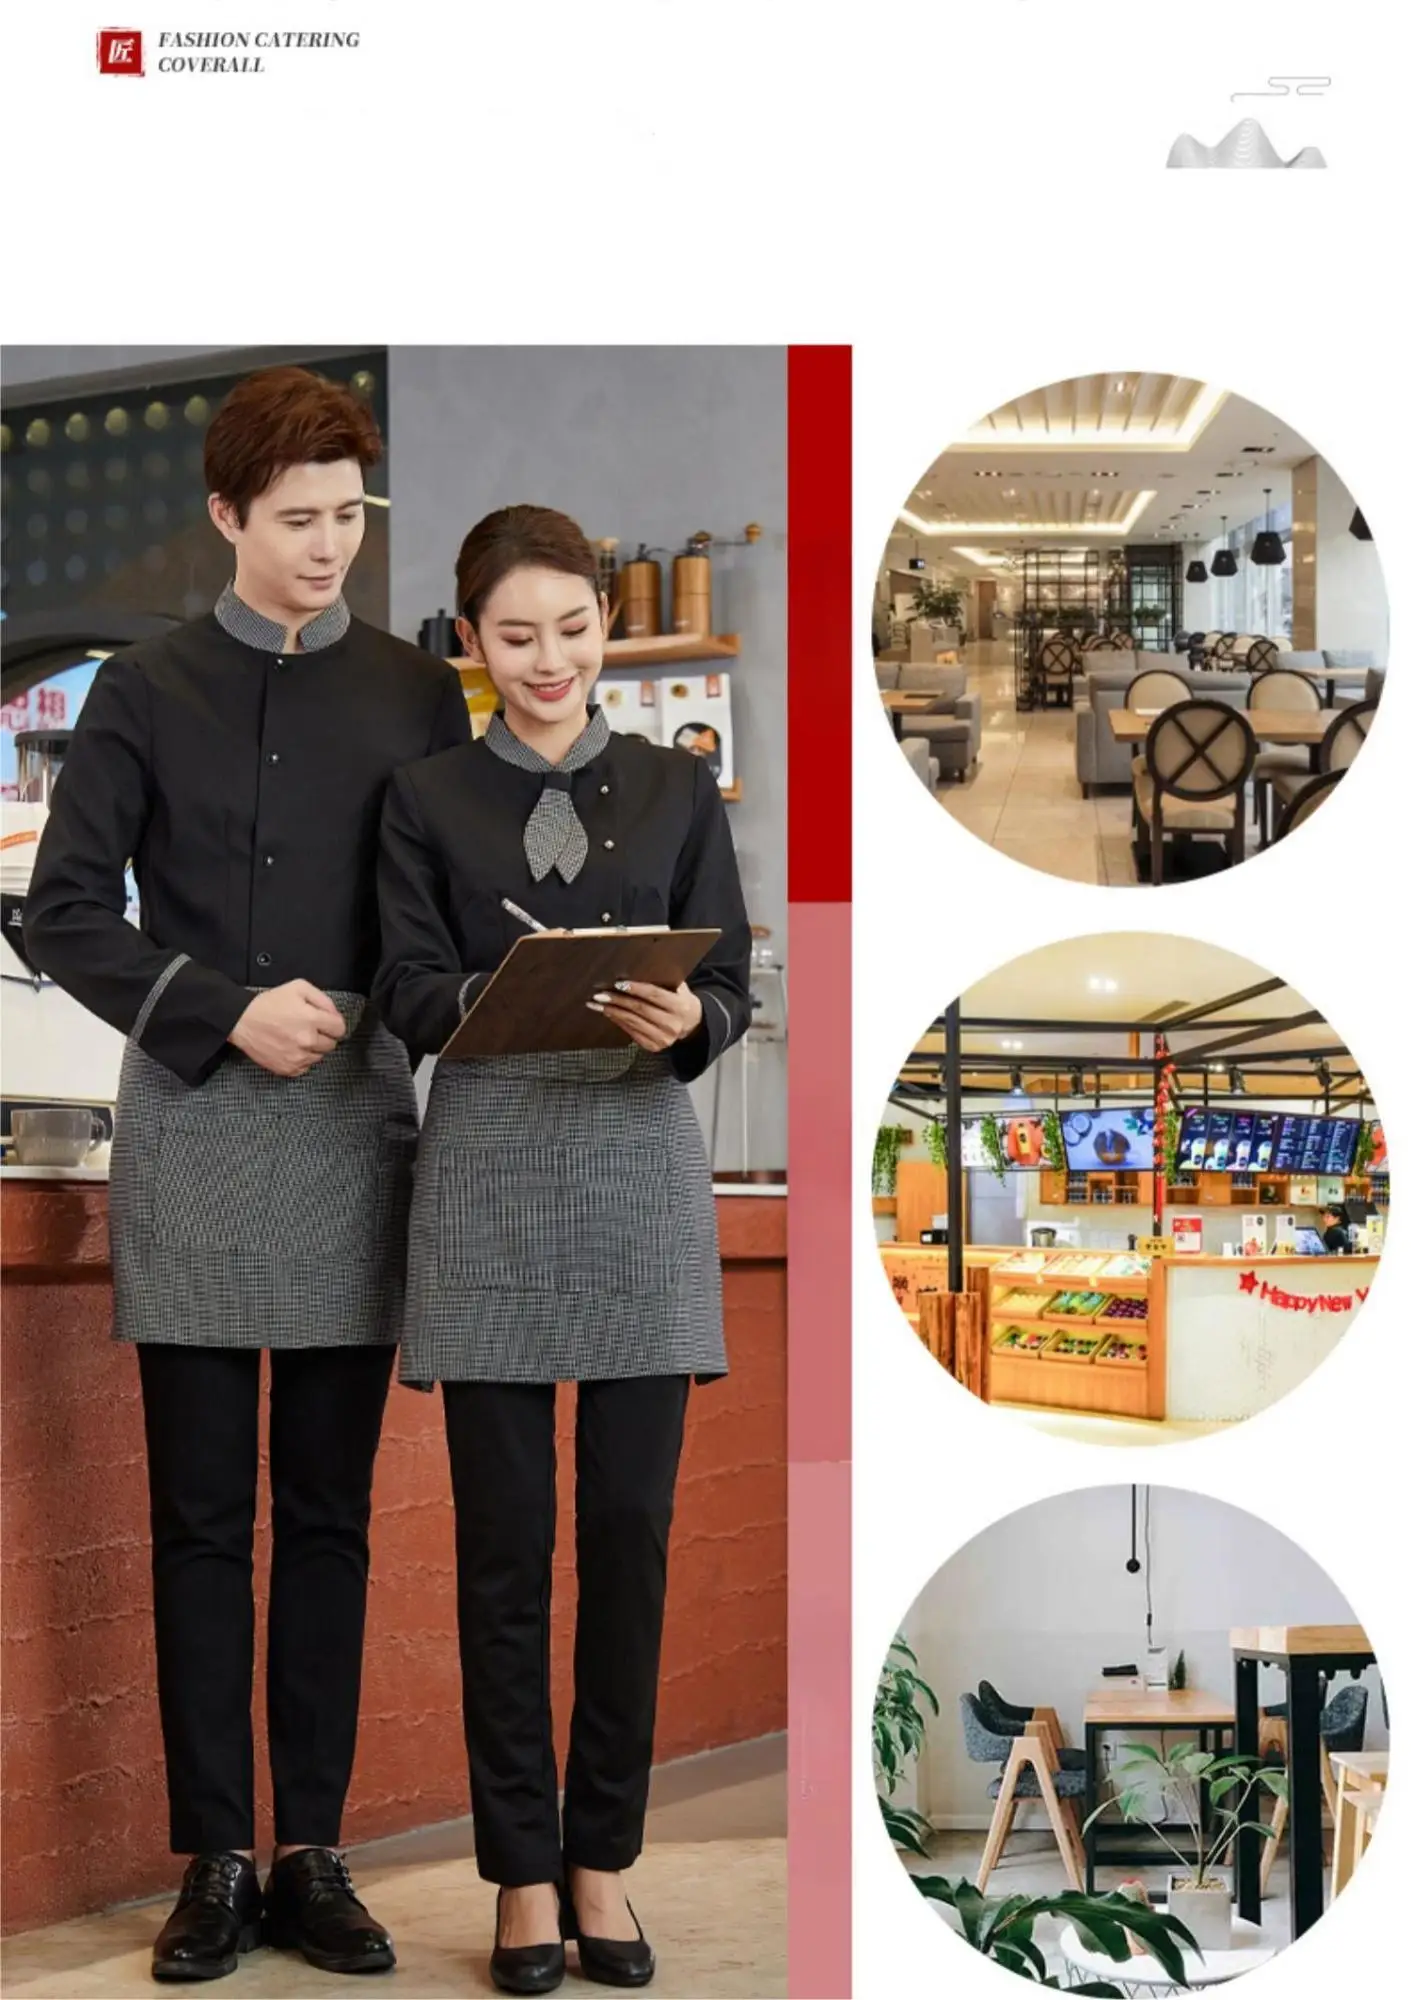 Couple Of Male Waiter And Female Waitress With Dishes And In Uniform  Restaurant Team Concept Food Service Staff Stock Illustration - Download  Image Now - iStock